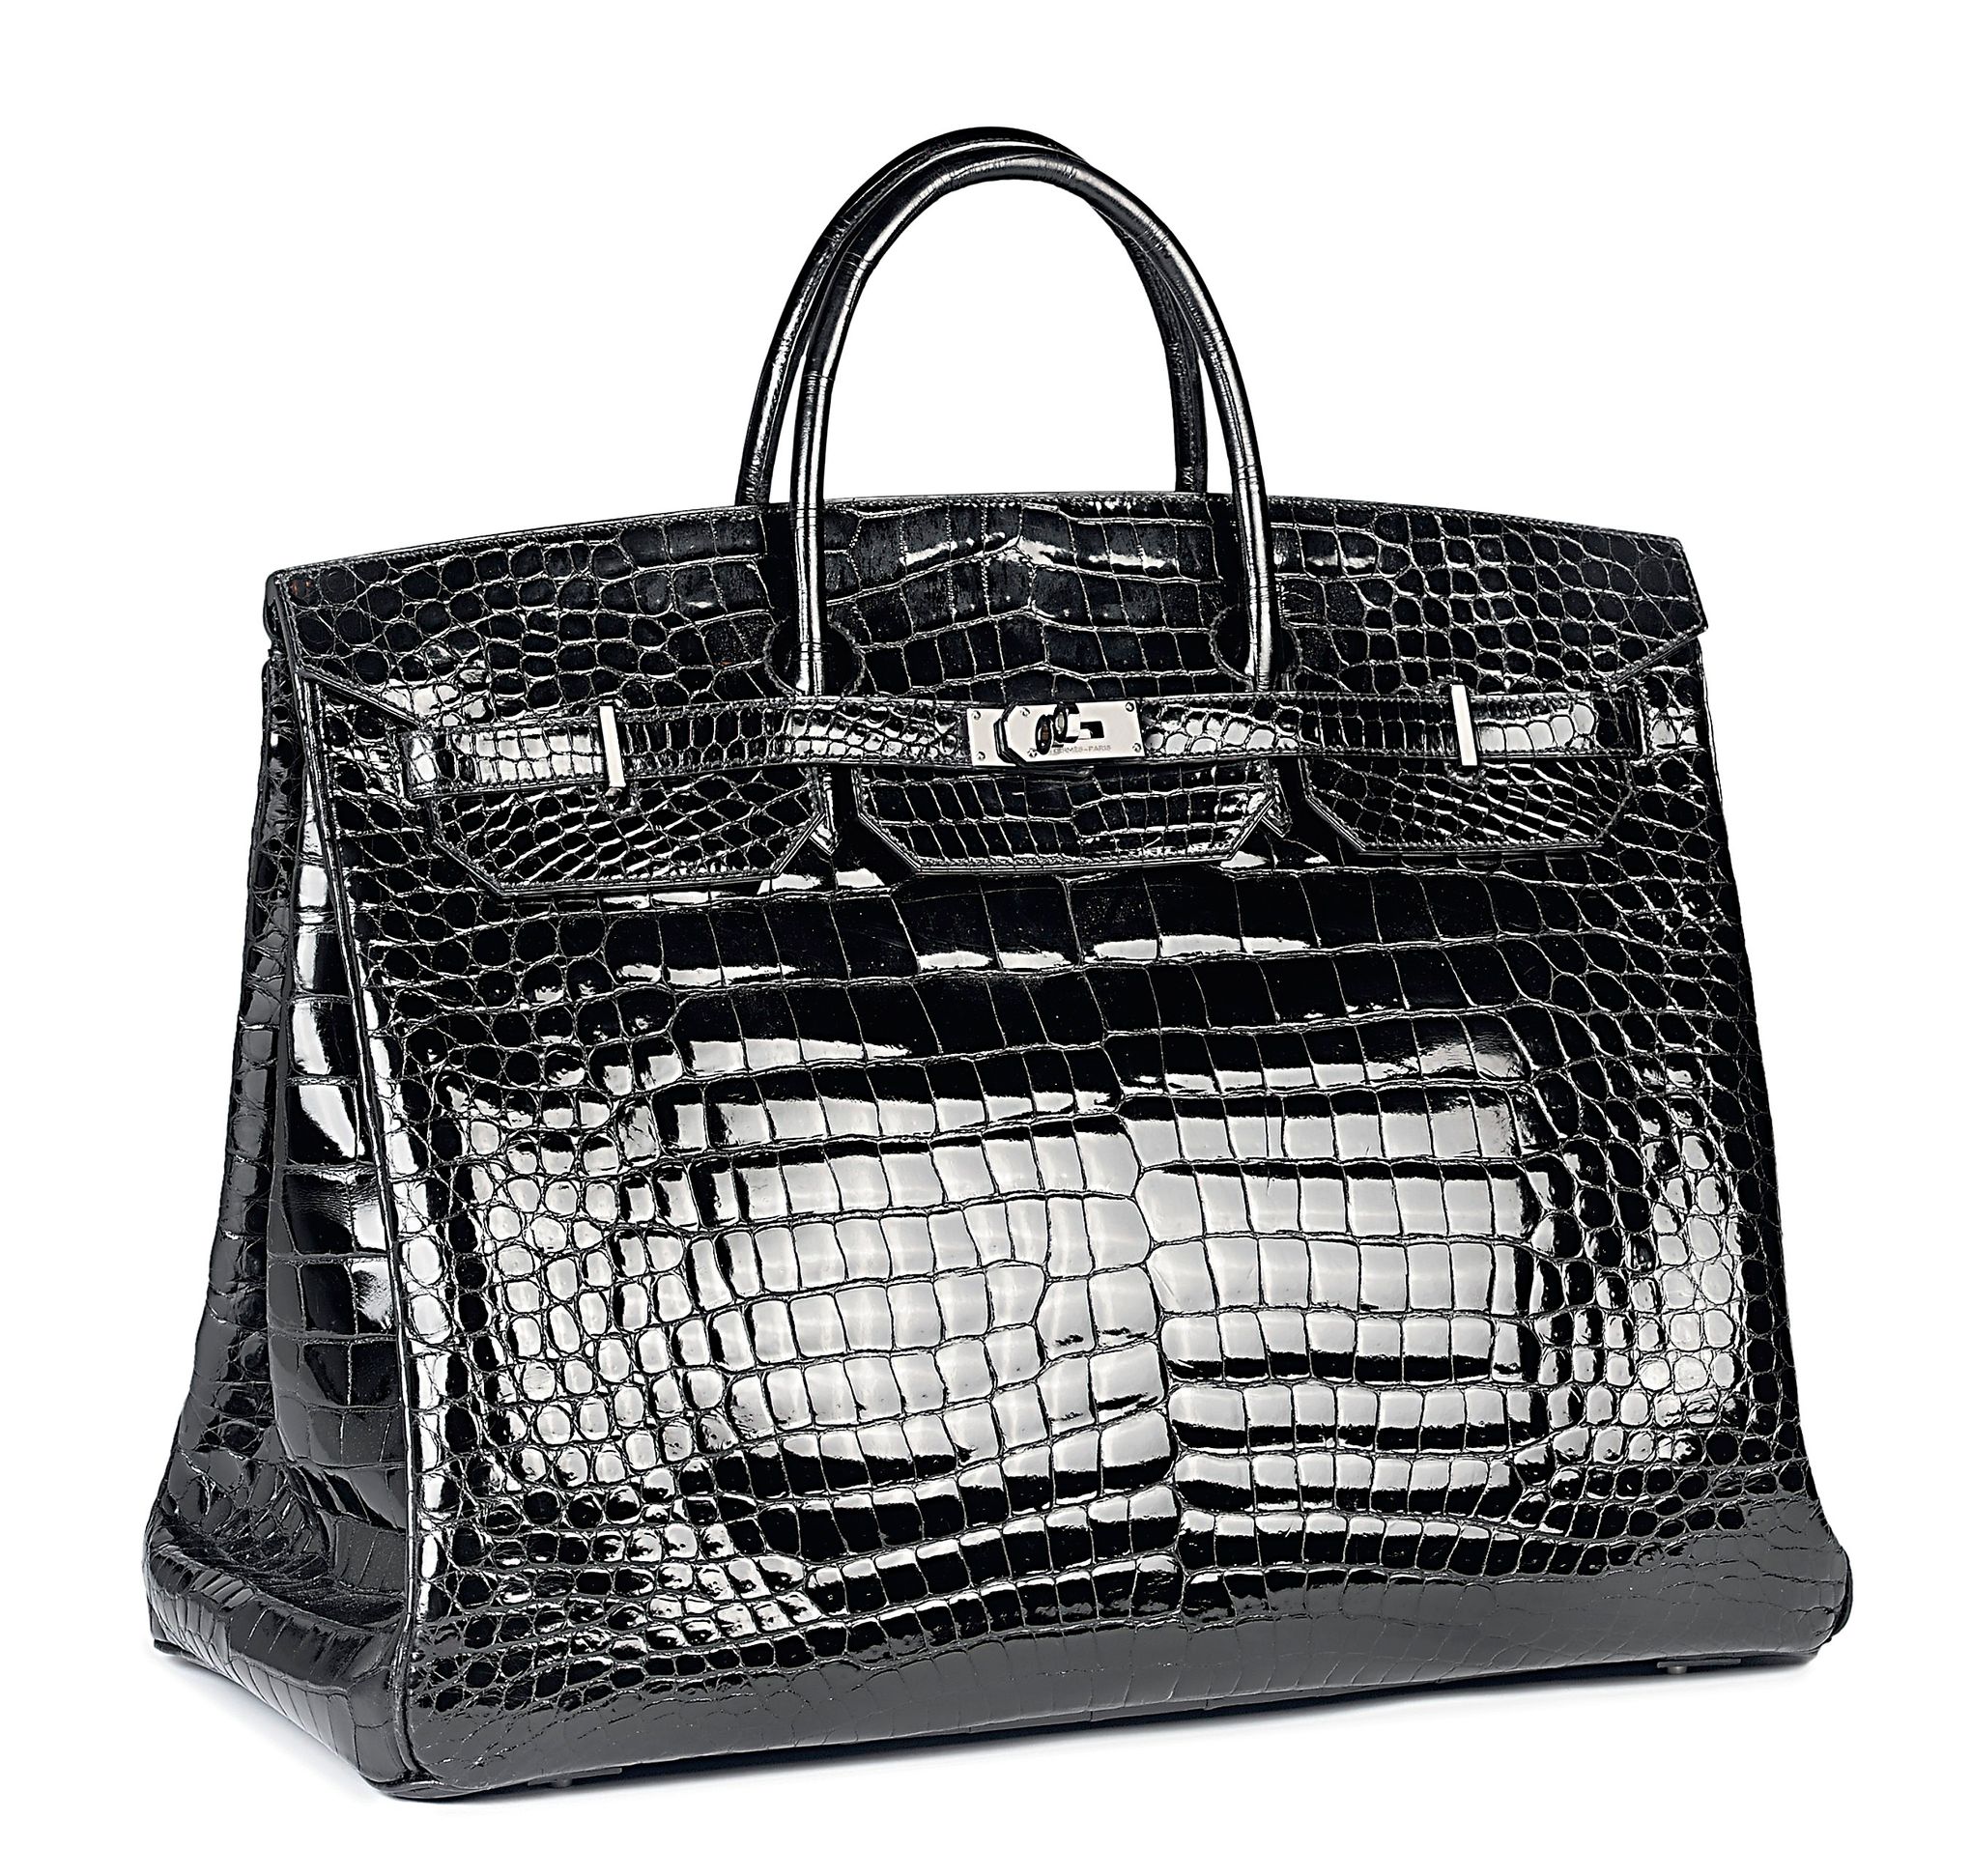 Timeless Birkin Bag Dupes: Iconic Luxury Within Reach